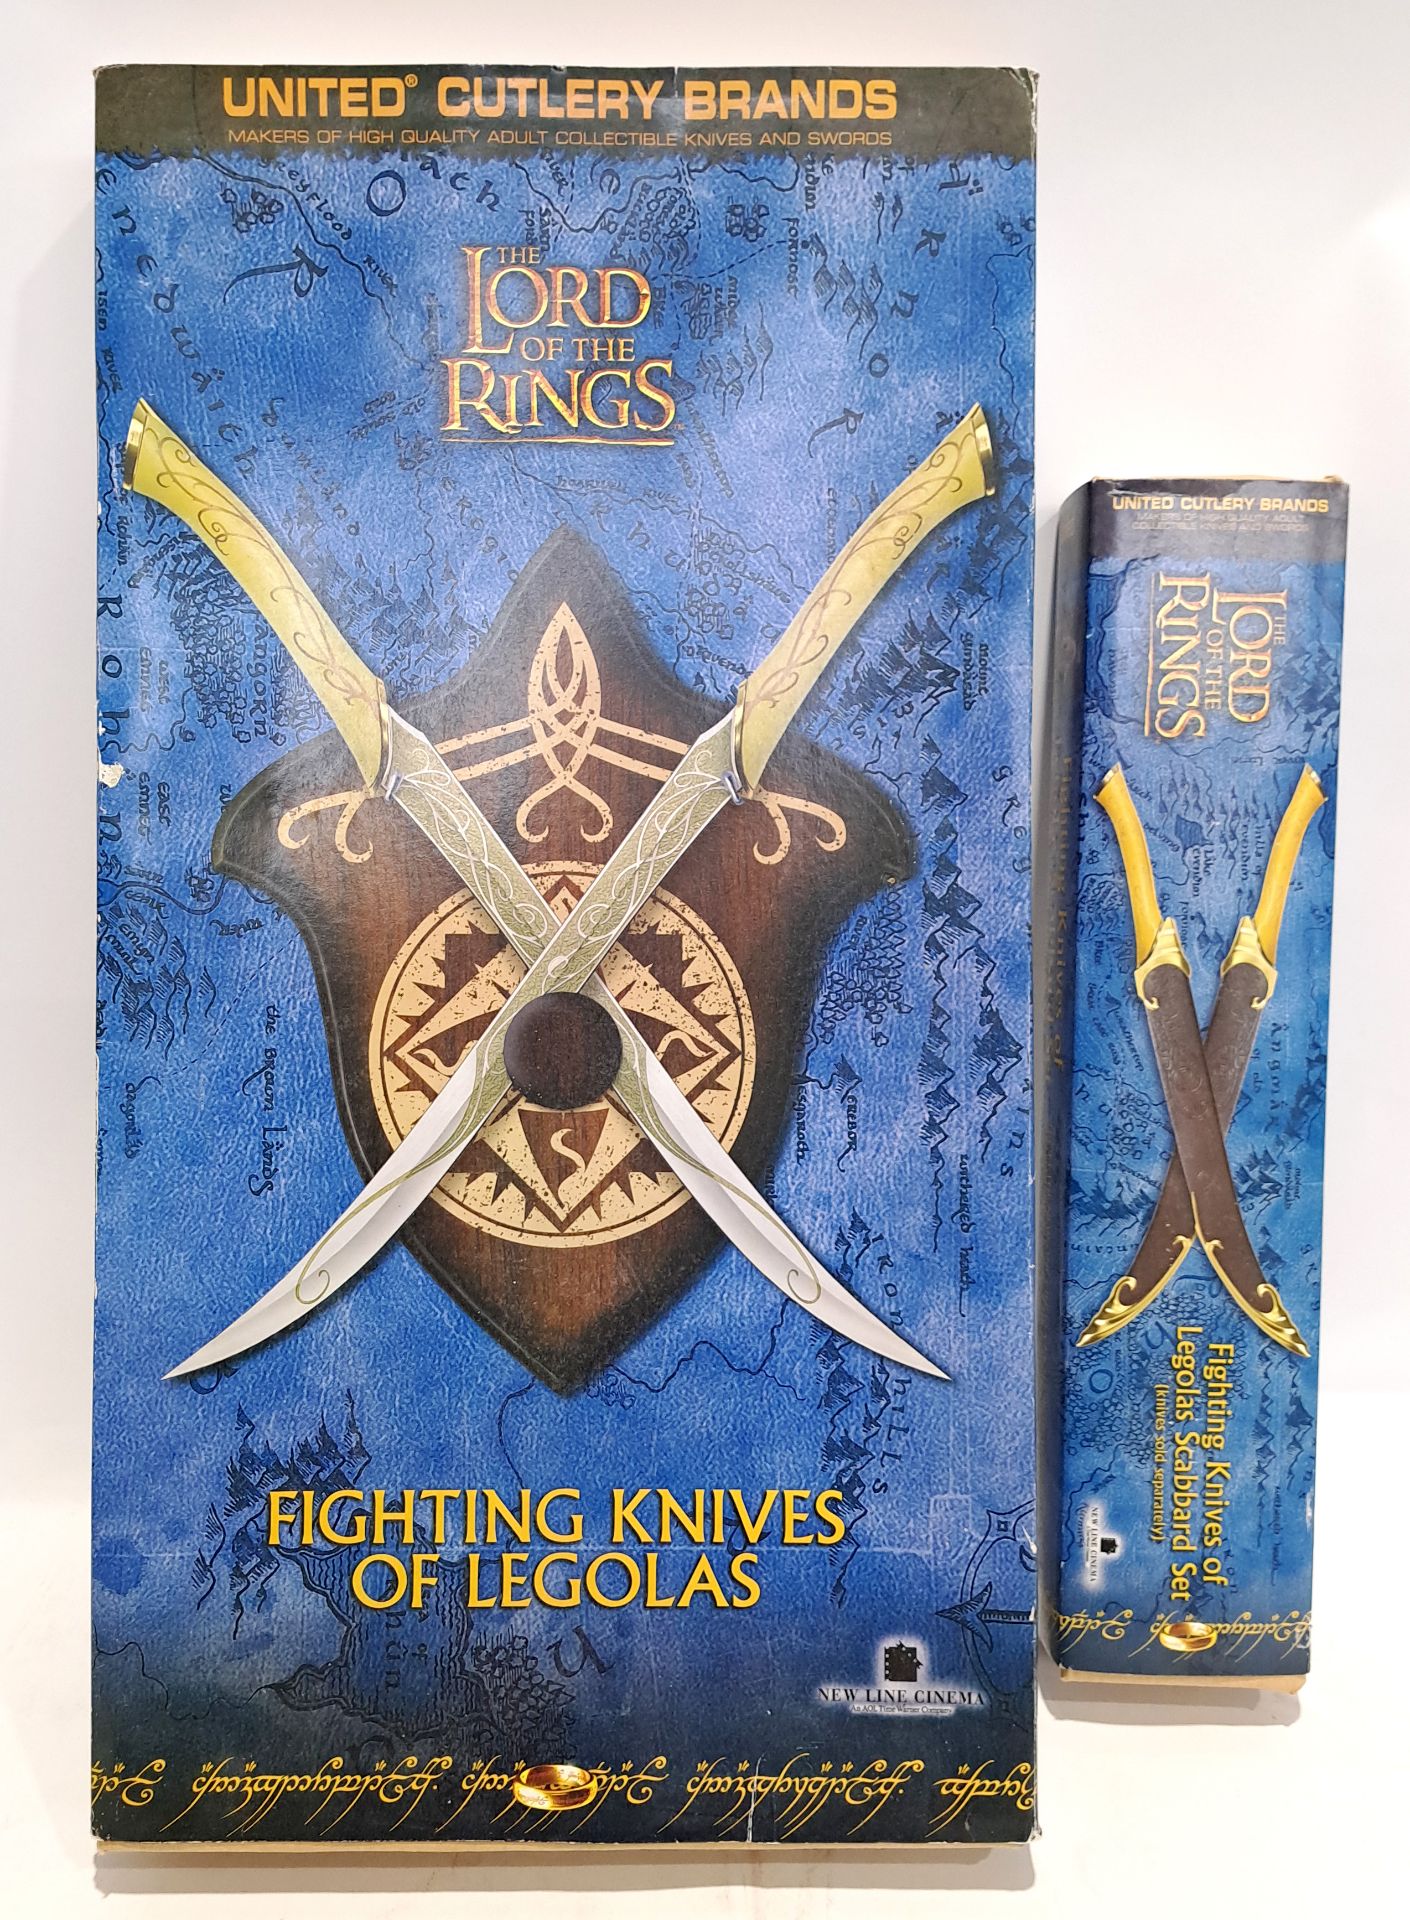 United Cutlery Brands The Lord of the Rings Fighting Knives of Legolas & Fighting Knives of Legol...